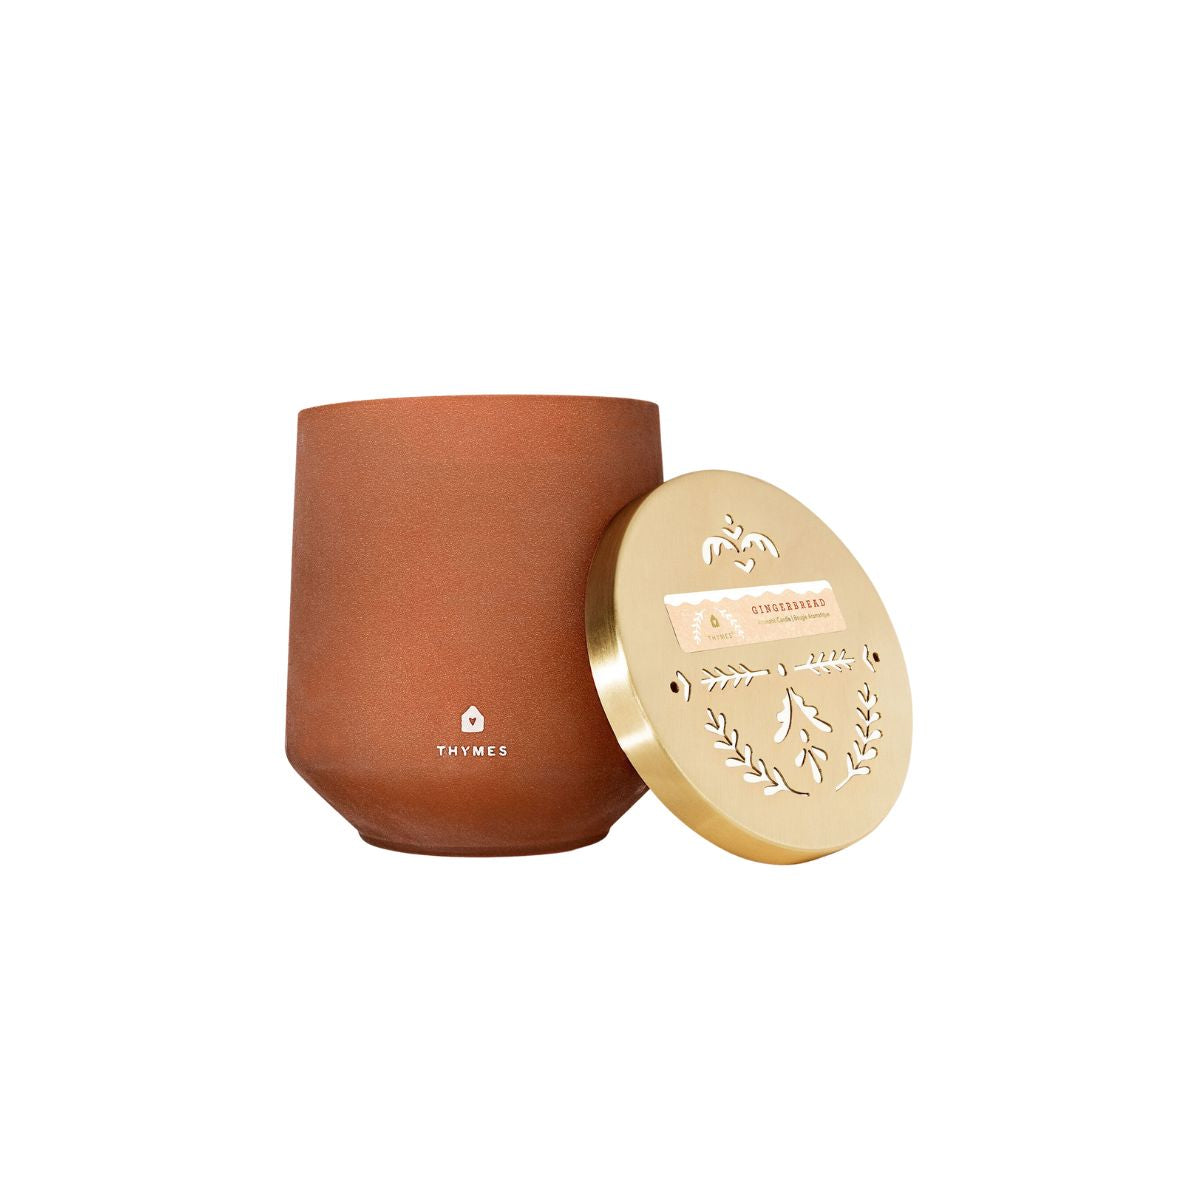 Thymes Large Gingerbread Poured Candle (15oz)